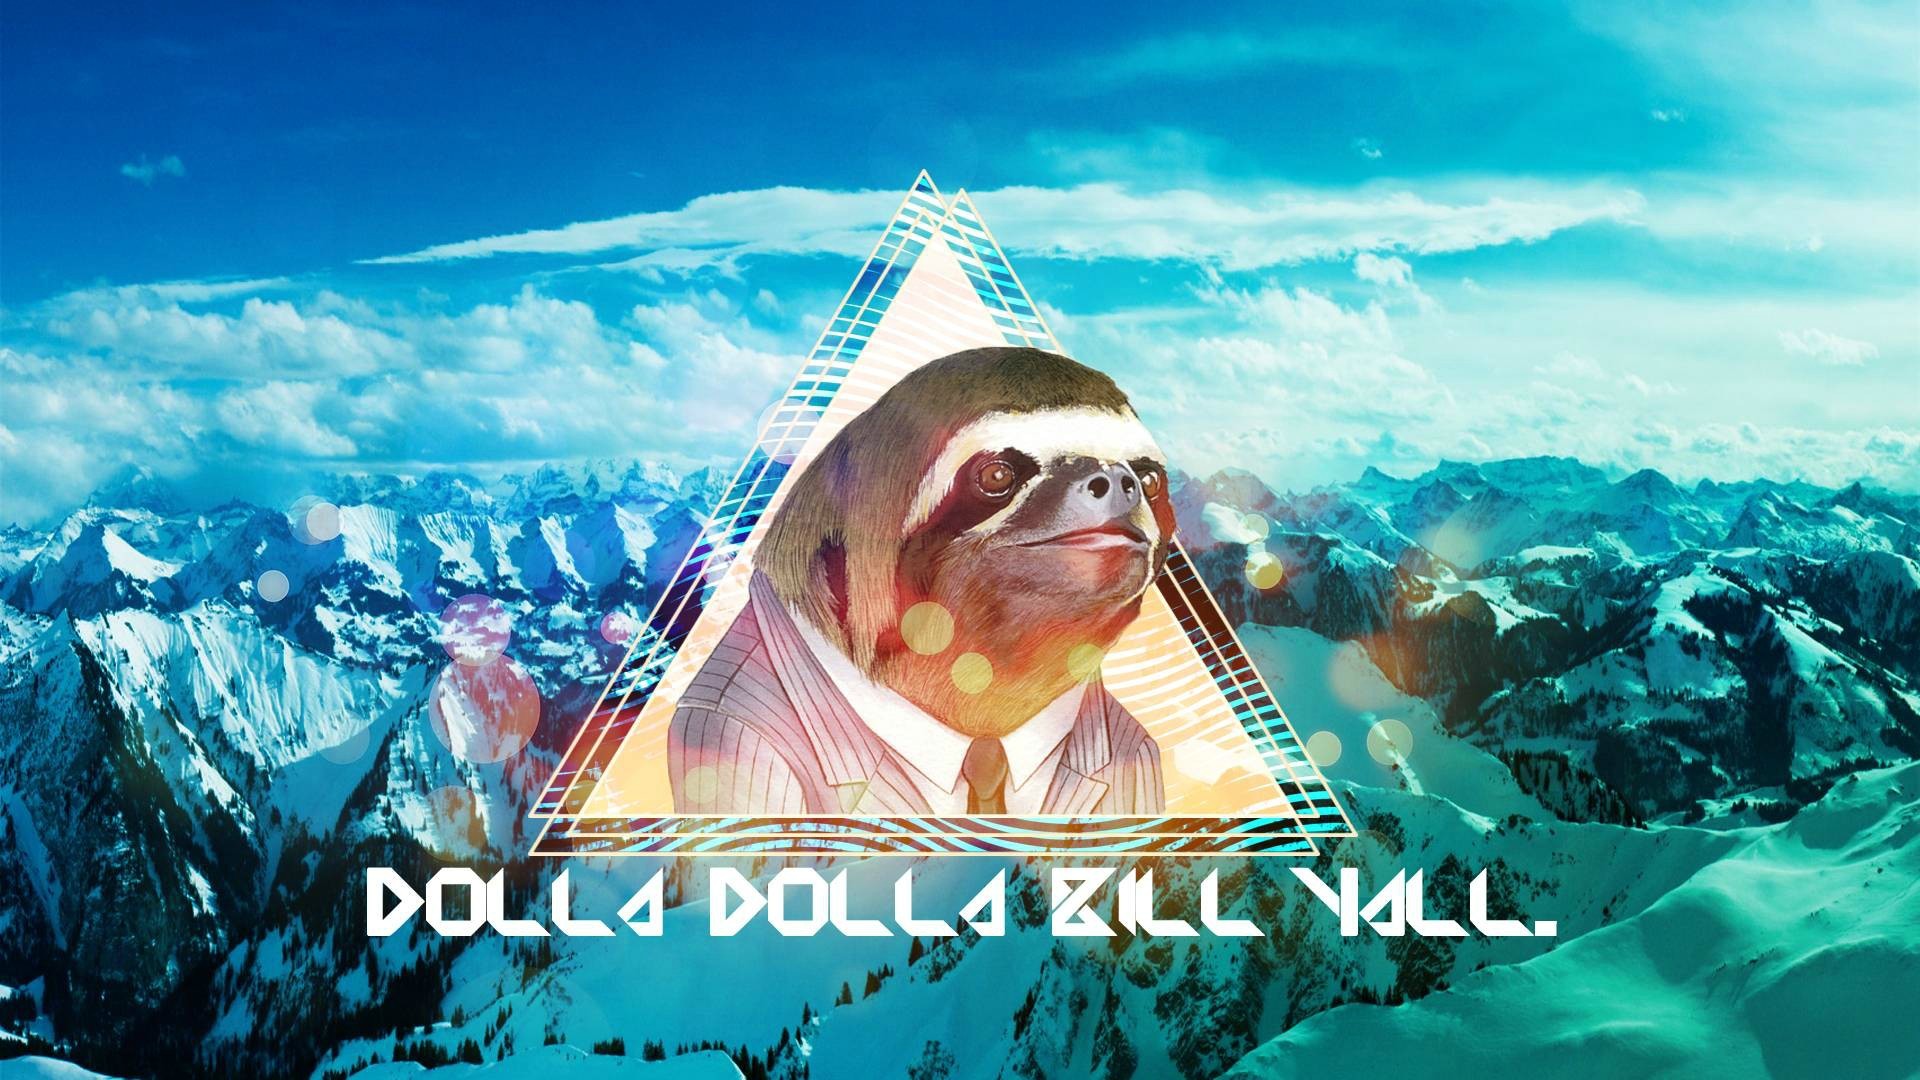 1920x1080 Images of Top Funny Sloth Backgrounds - #SC